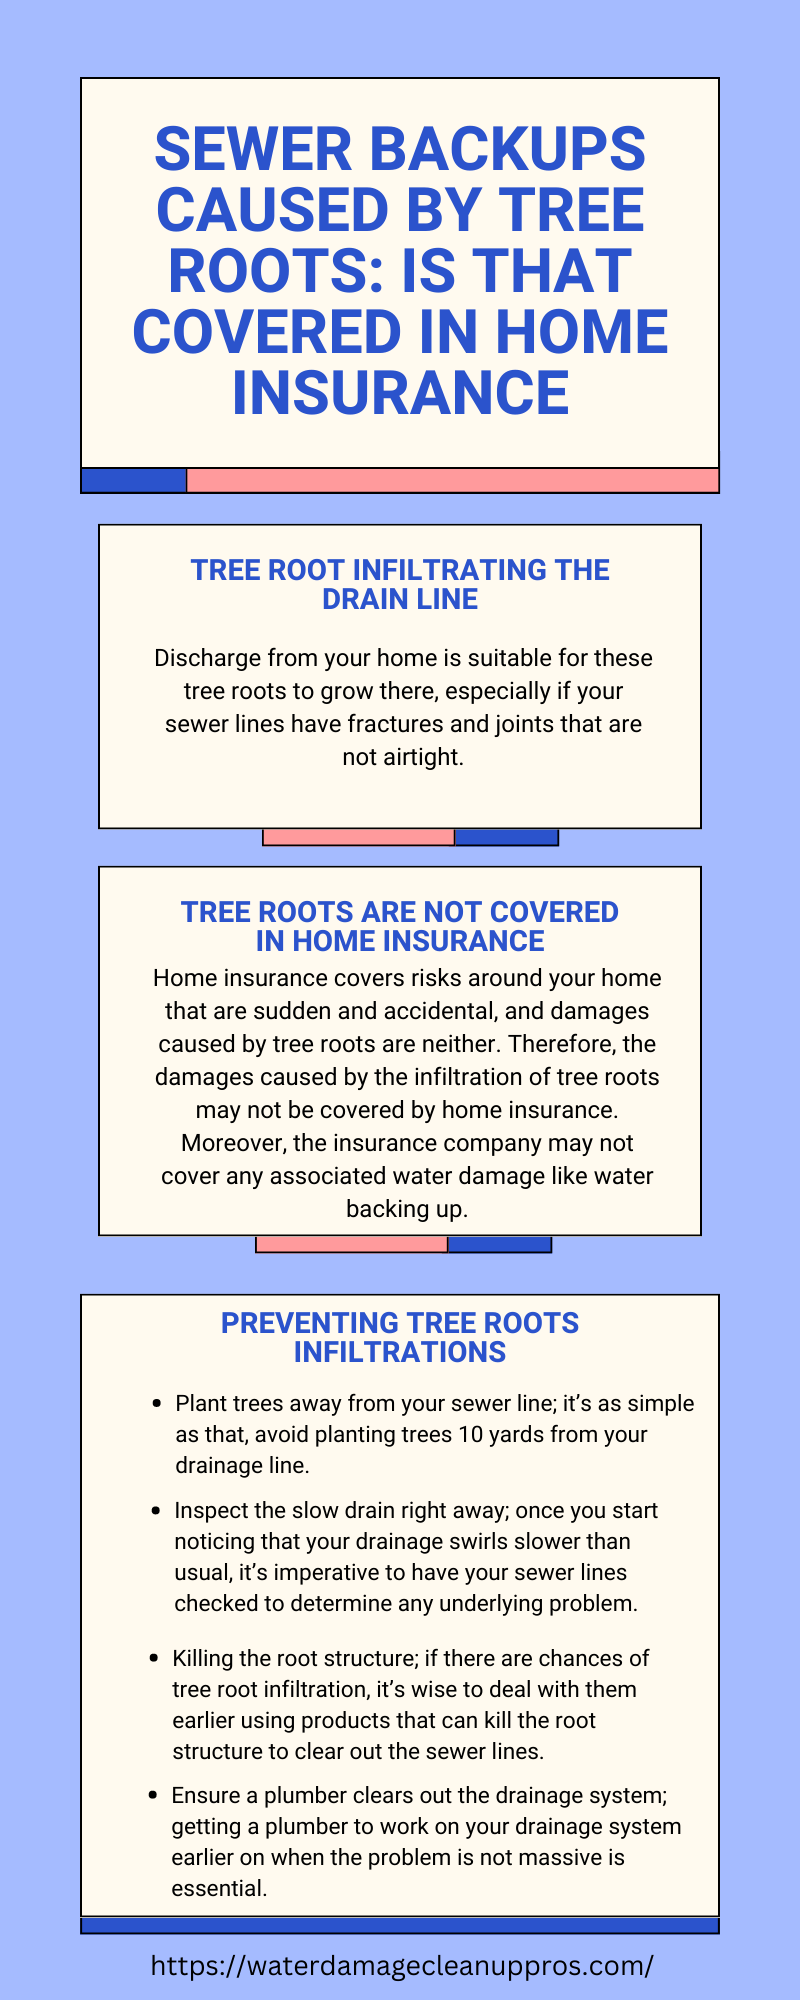 Sewer Backups Caused By Tree Roots Is That Covered in Home Insurance